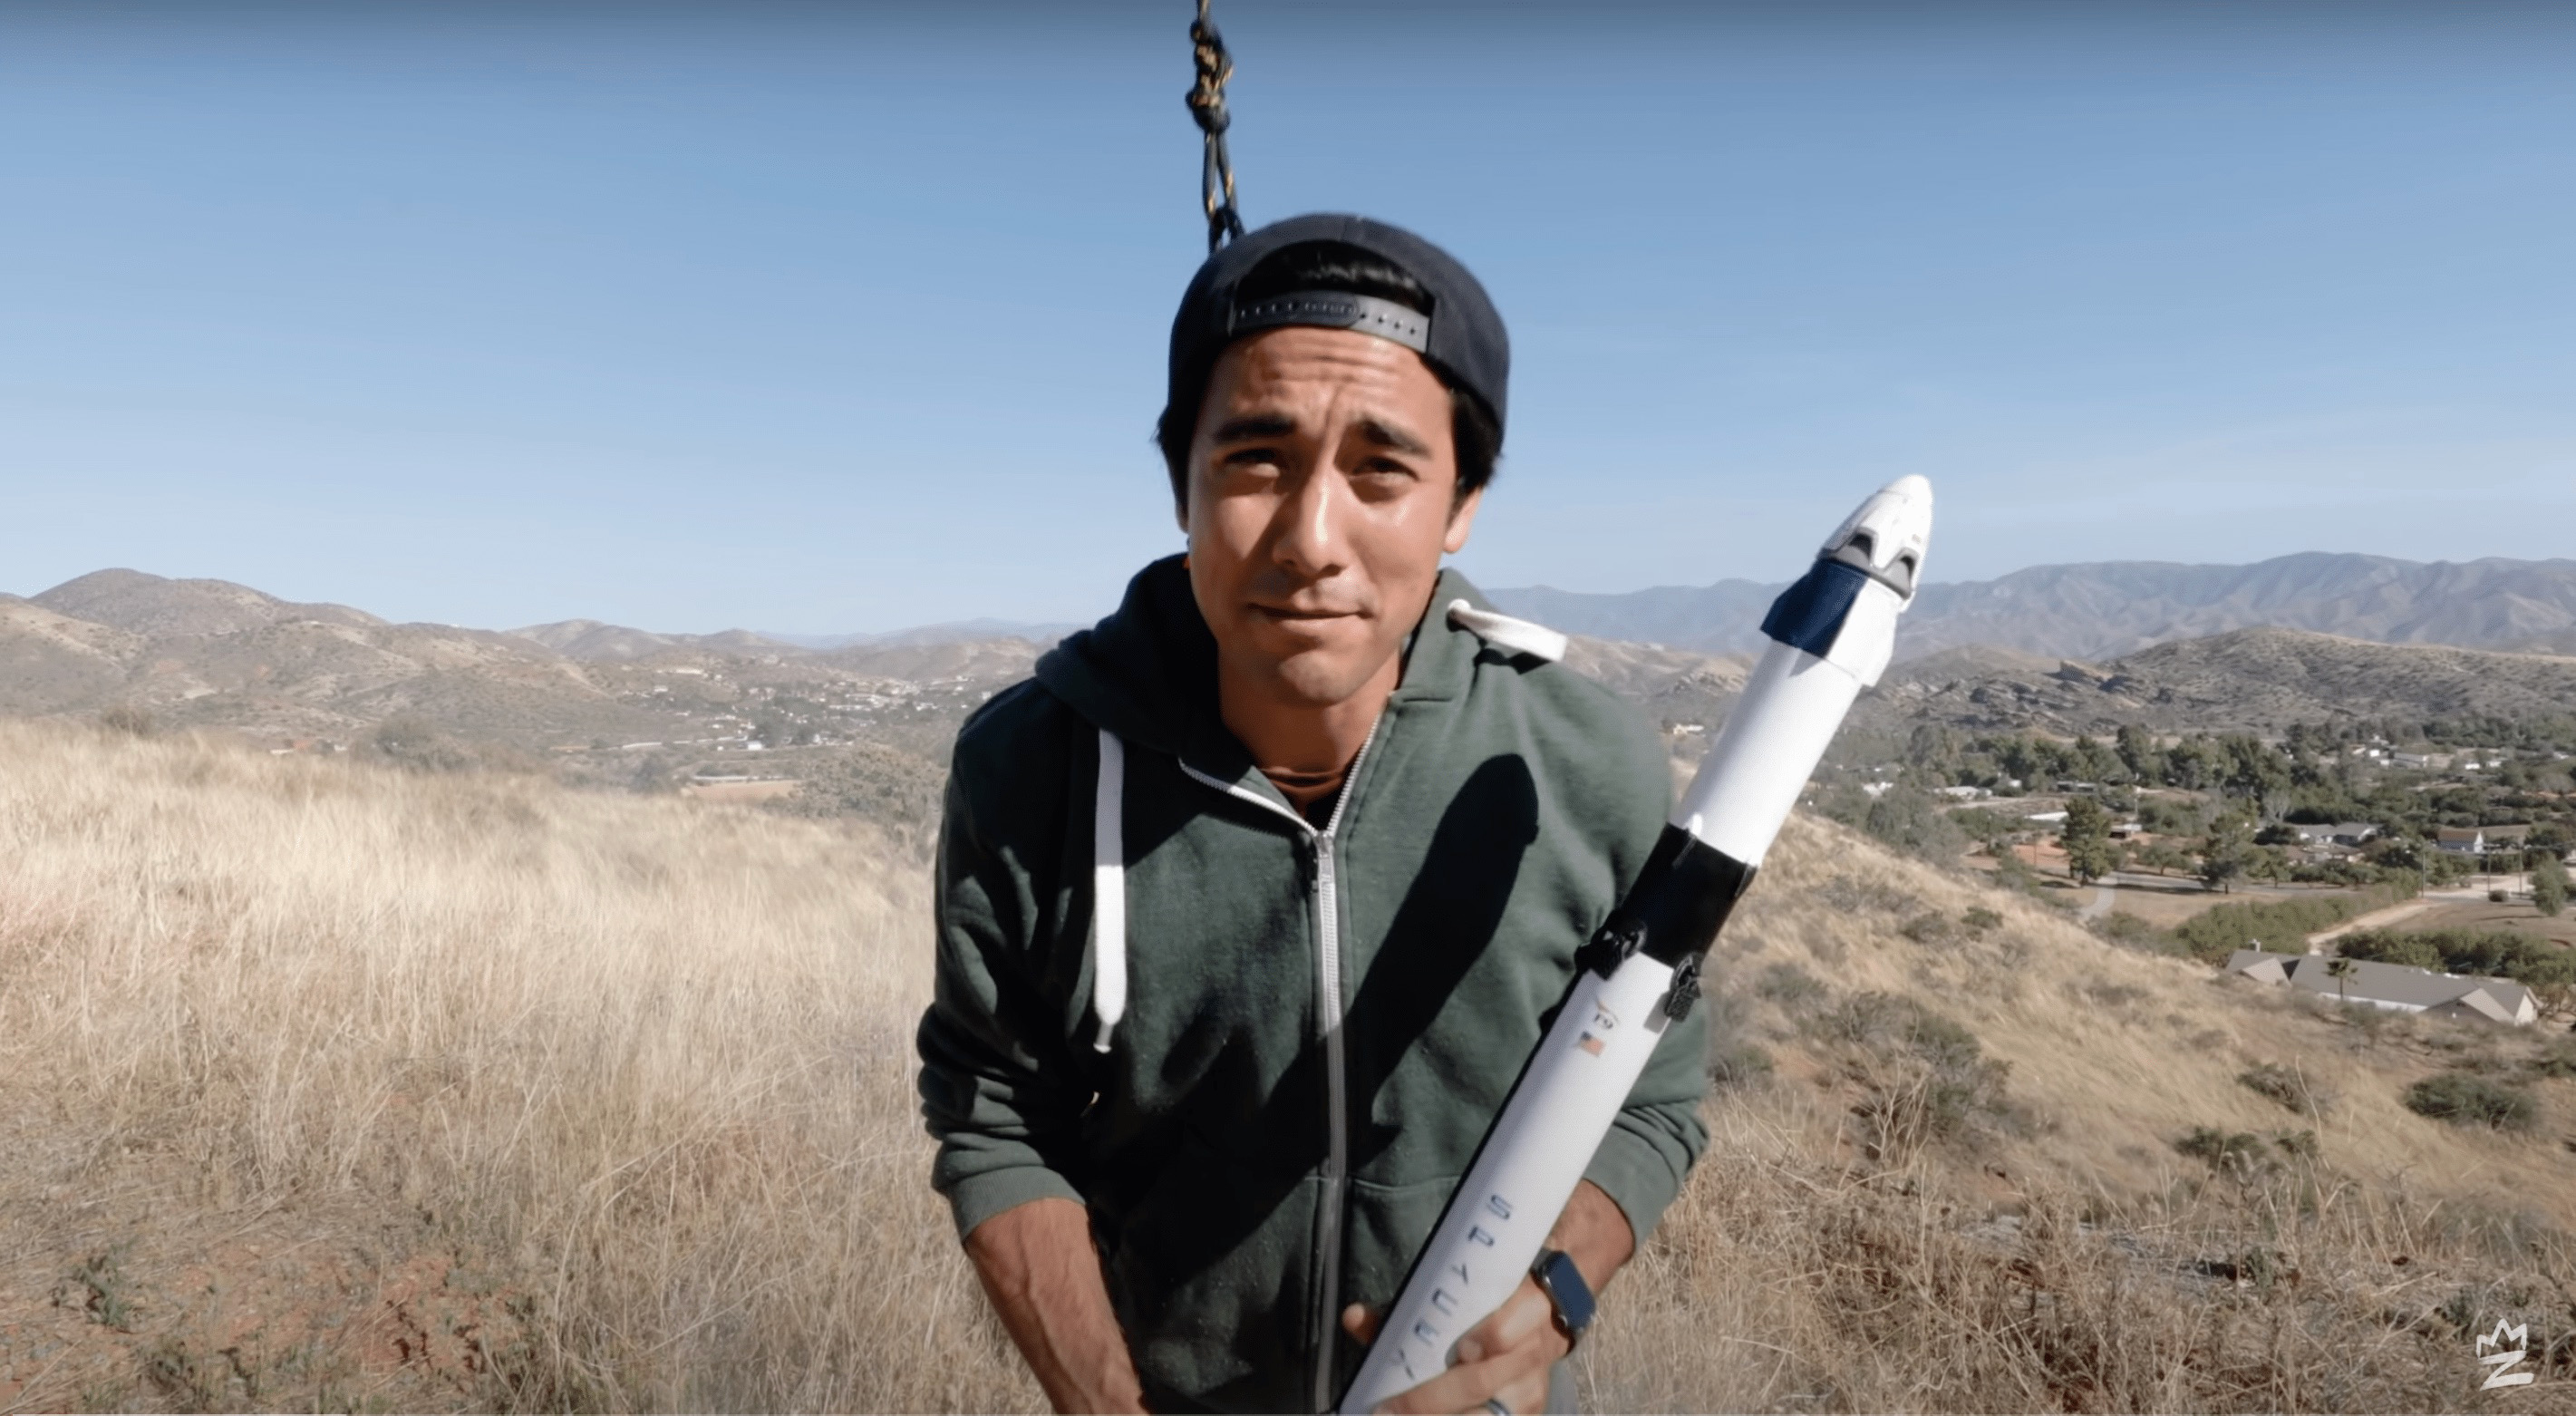 Zach King with a rocket